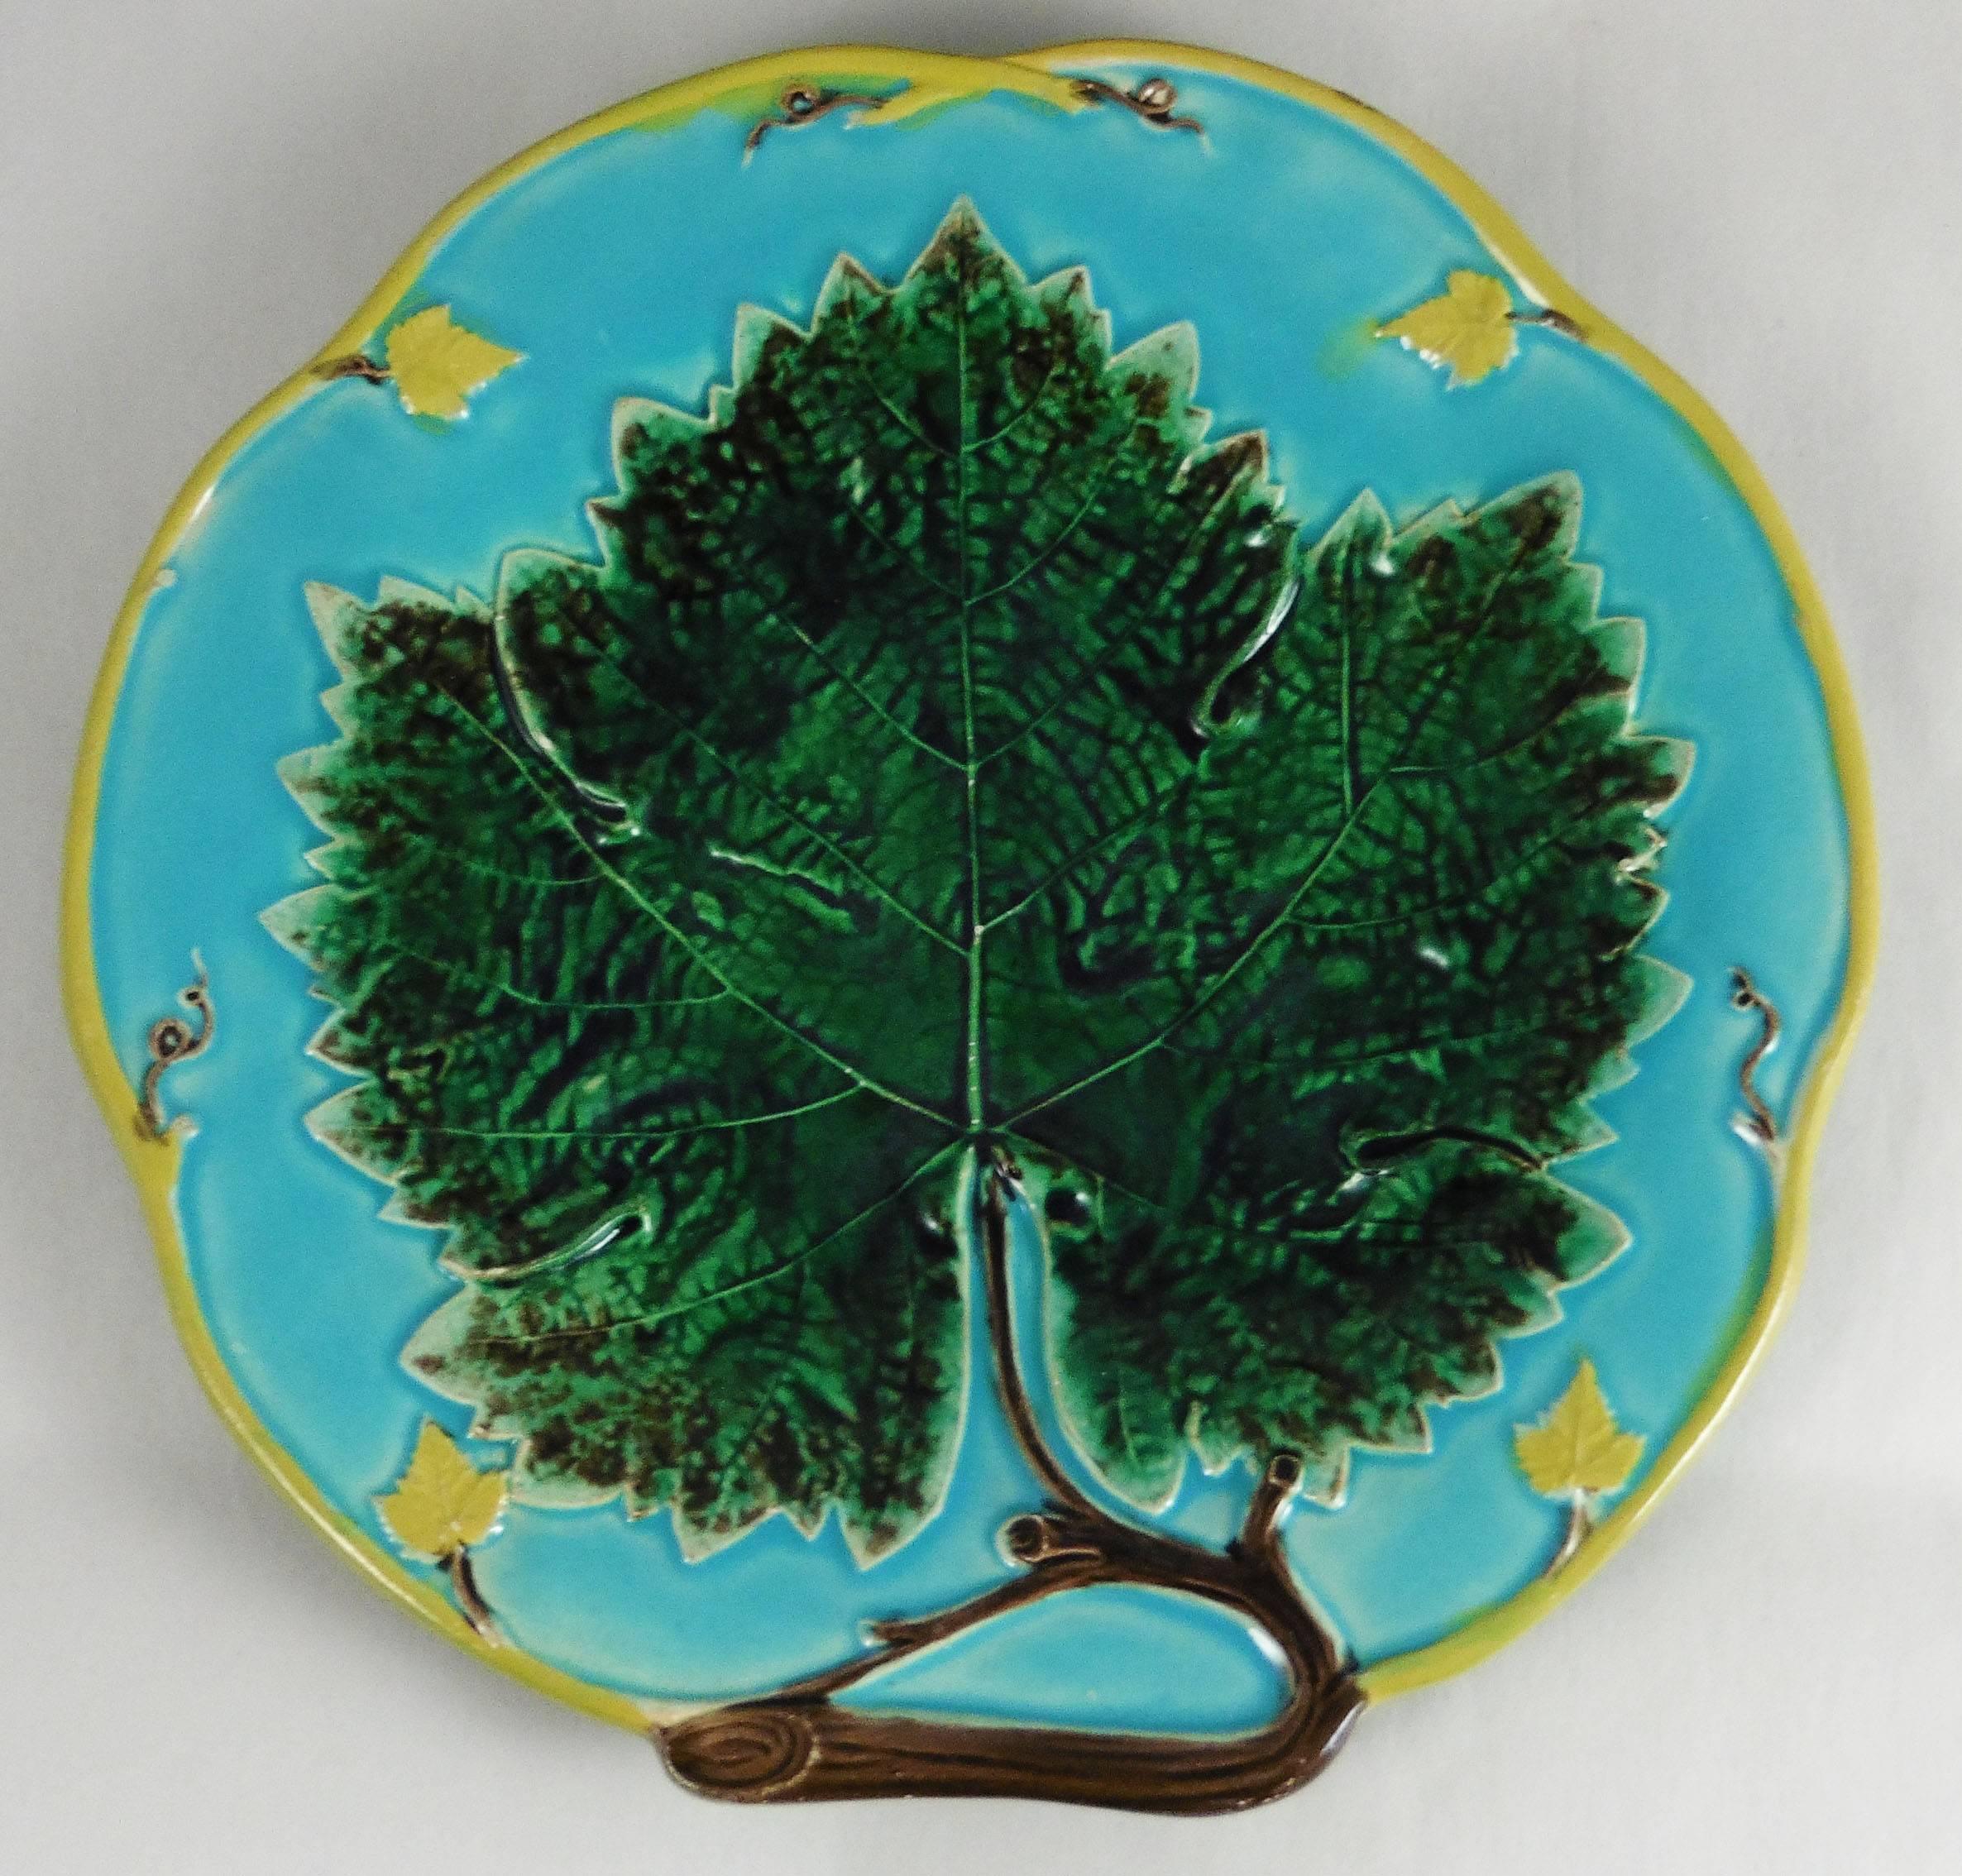 Colorful Victorian Majolica leaf plate signed Joseph Holdcroft. On a turquoise background, a large leaf with a branch who gave an unusual shape to this plates, surrounded by a yellow border.